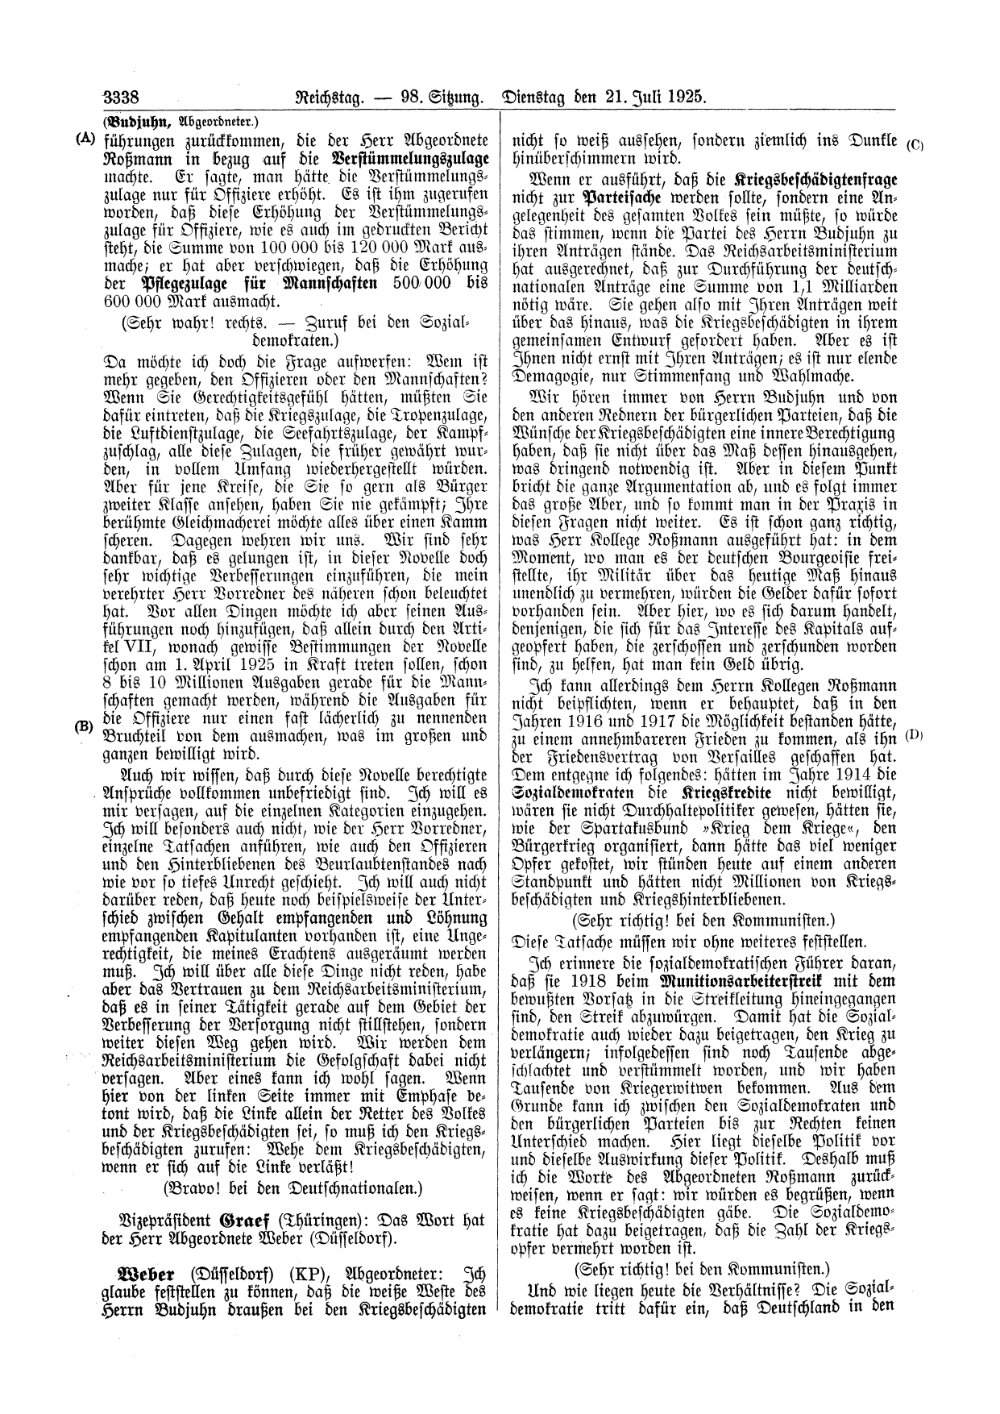 Scan of page 3338